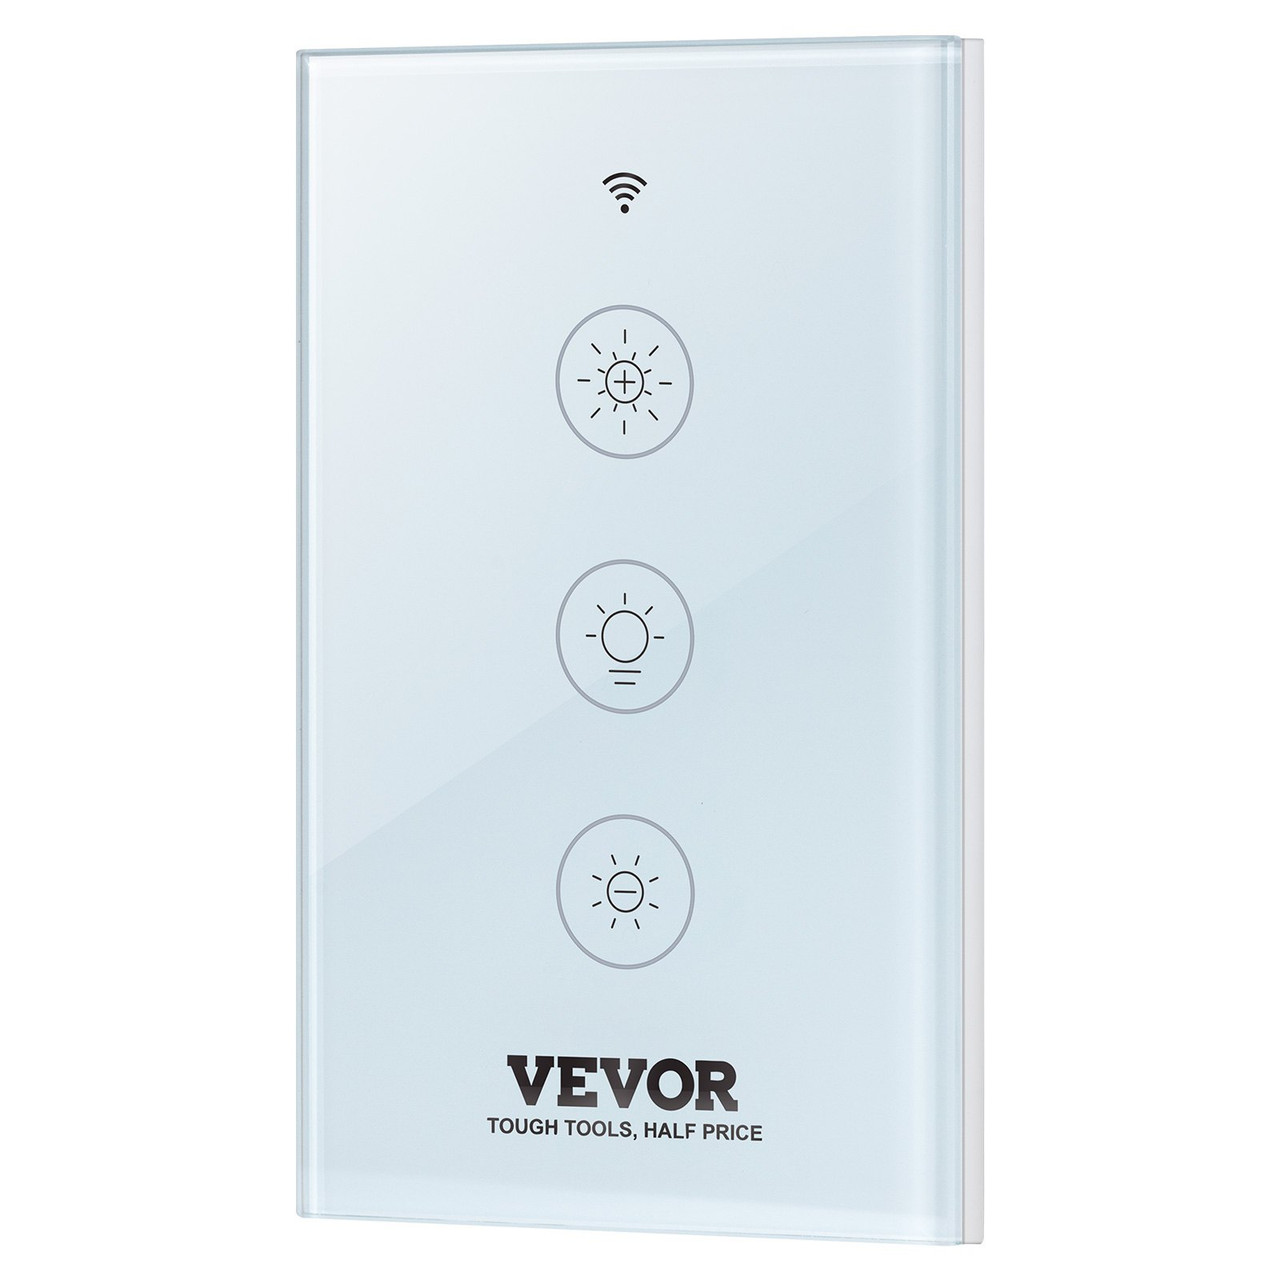 VEVOR 2PCS WiFi Smart Light Dimmer Switch, 100-250V AC Wi-Fi 2.4GHz, 15% to 85% Stepless Dimming LED Dimmable Smart Switch with Touch Panel, App Remote Control Voice Compatible with Alexa Google Home